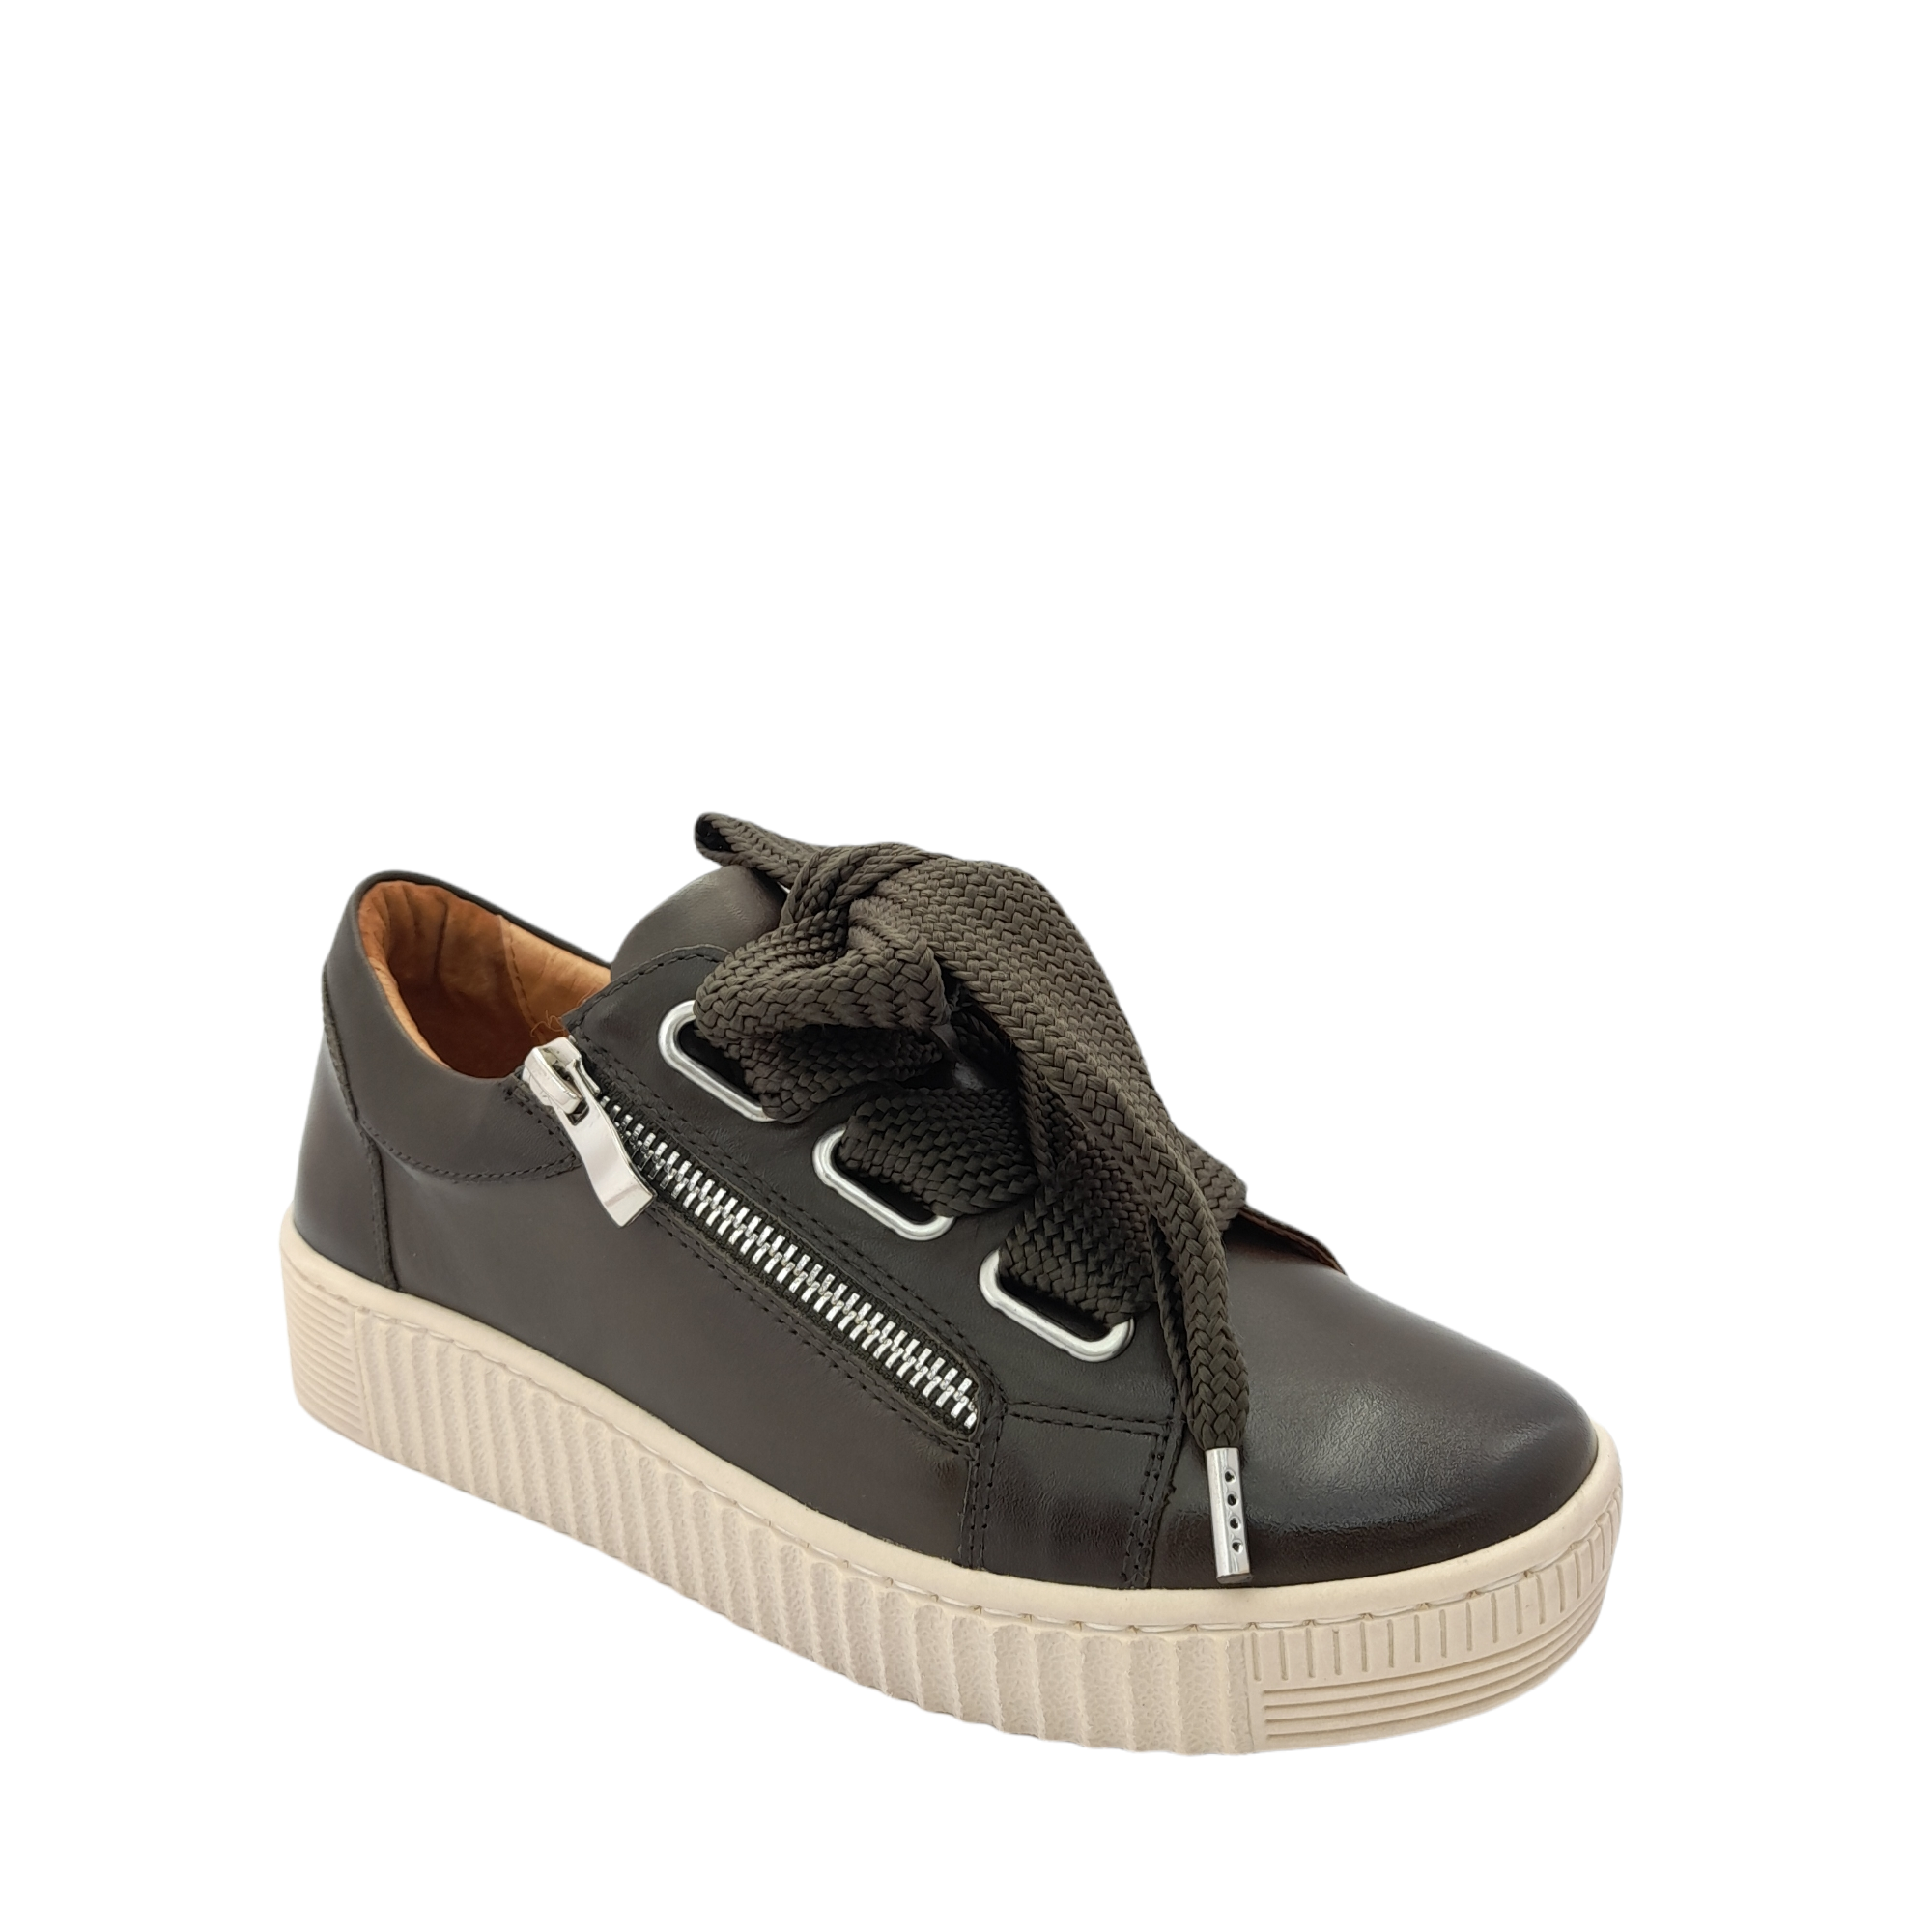 Shop Jovi 2 EOS - with shoe&amp;me - from EOS - Sneaker - Sneaker, Summer, Winter, Womens - [collection]